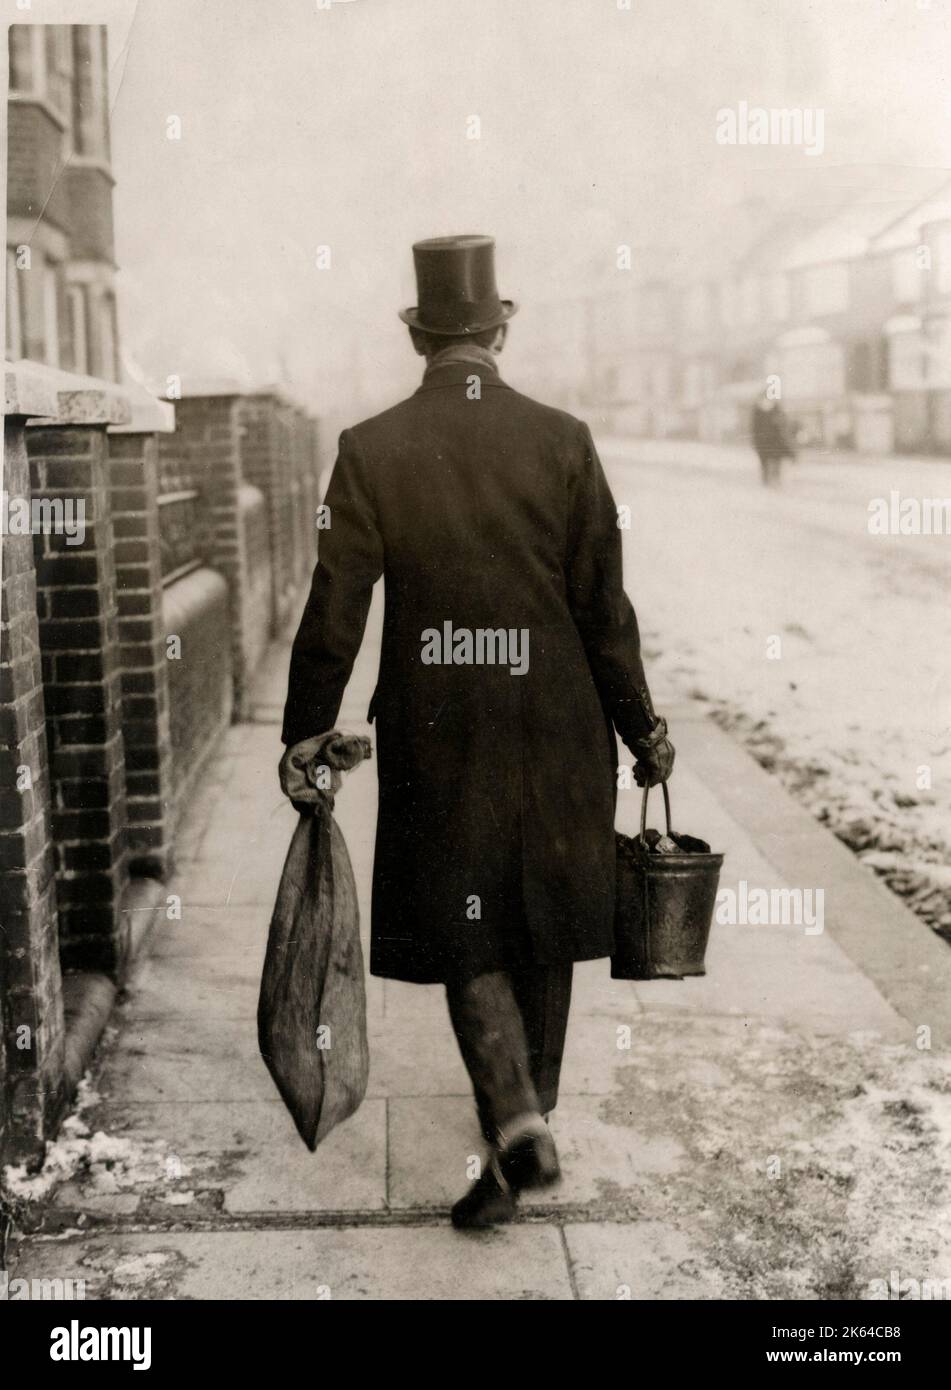 Coal shortage during the miners strike of 1926 - a city gentleman is forced to carry his own coal home during the industrial unrest and shortages of 1926. Stock Photo